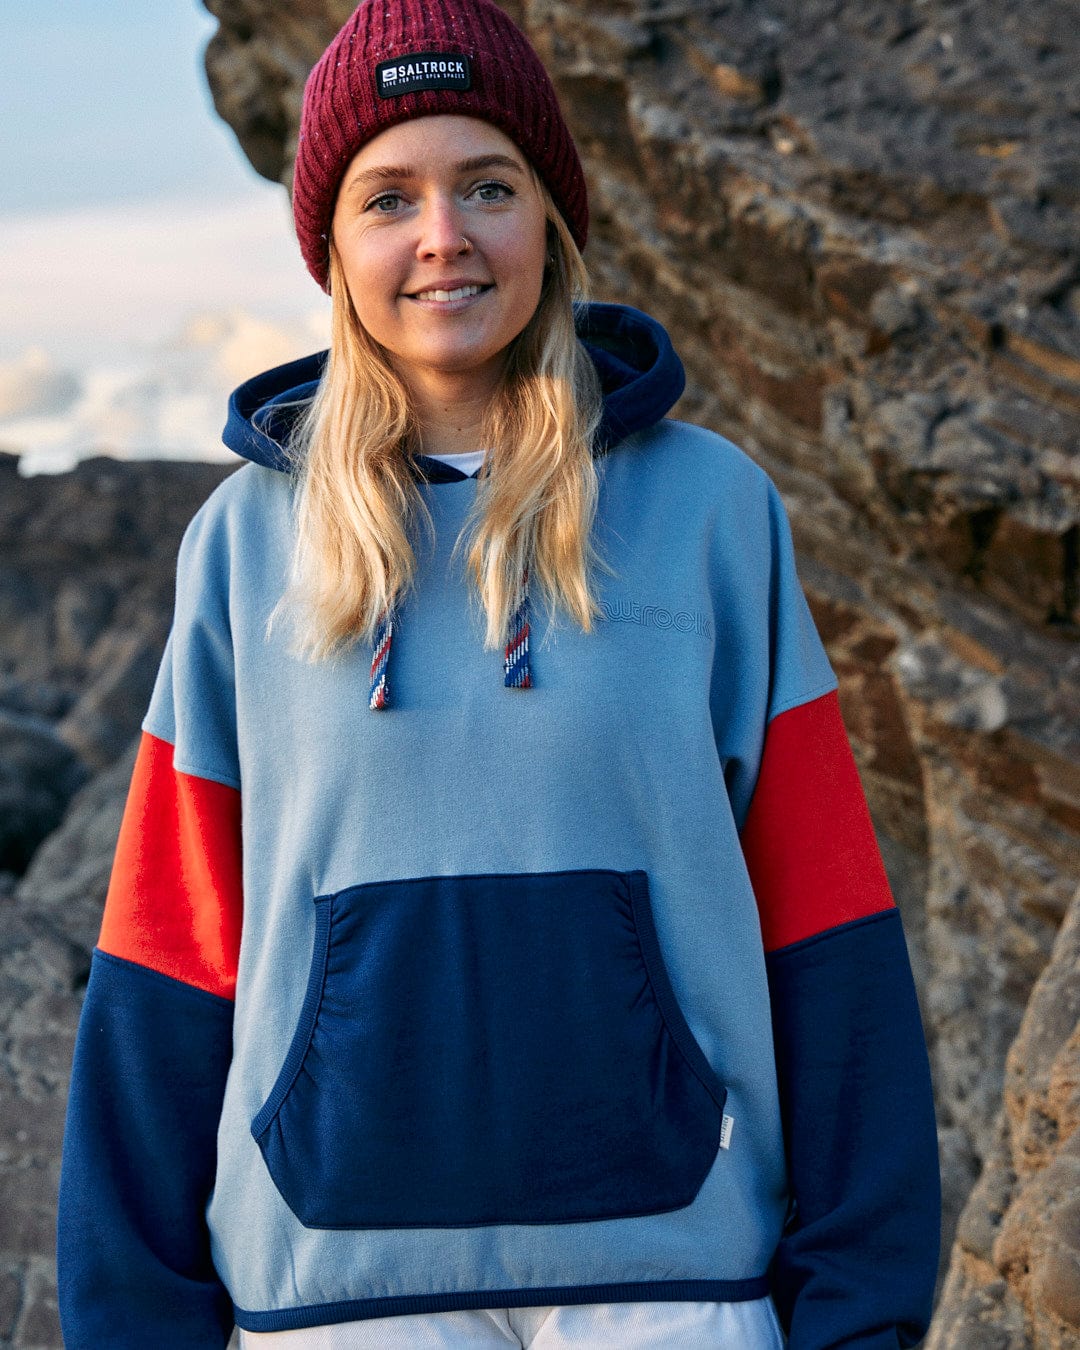 A woman wearing a relaxed fit blue and red hoodie with contrast paneling, showcasing Saltrock branding, standing on a rock.